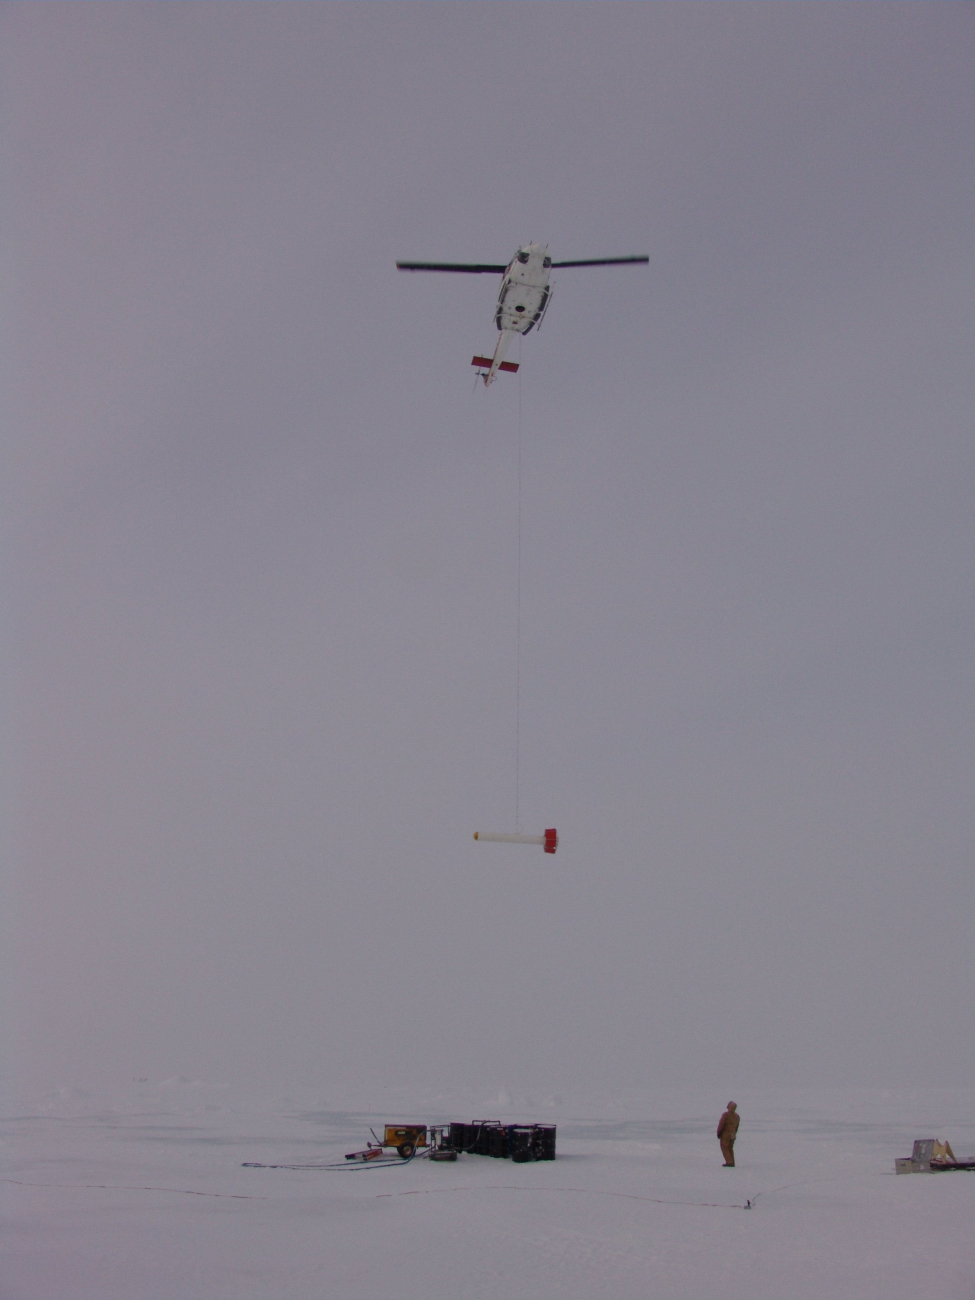 Transporting  the electromagnetic induction bird by helicopter